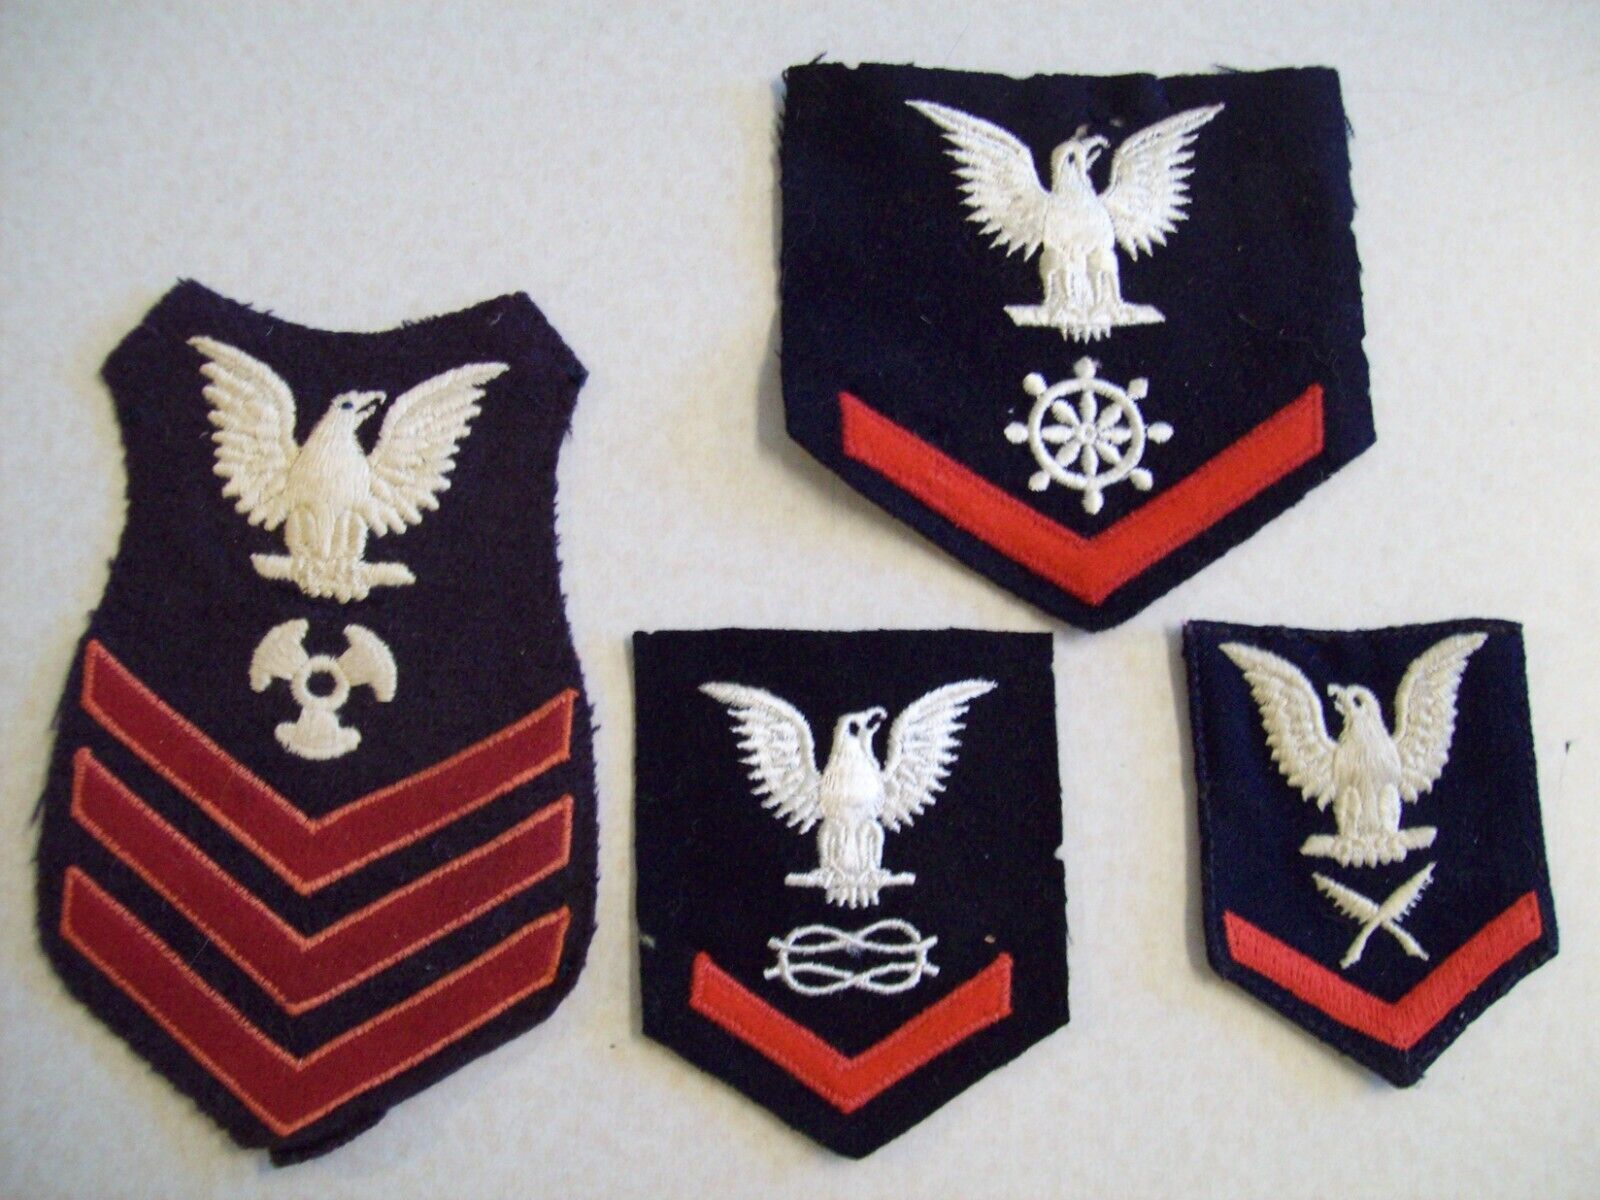 4 US Navy Eagle Rating Insignia Patches